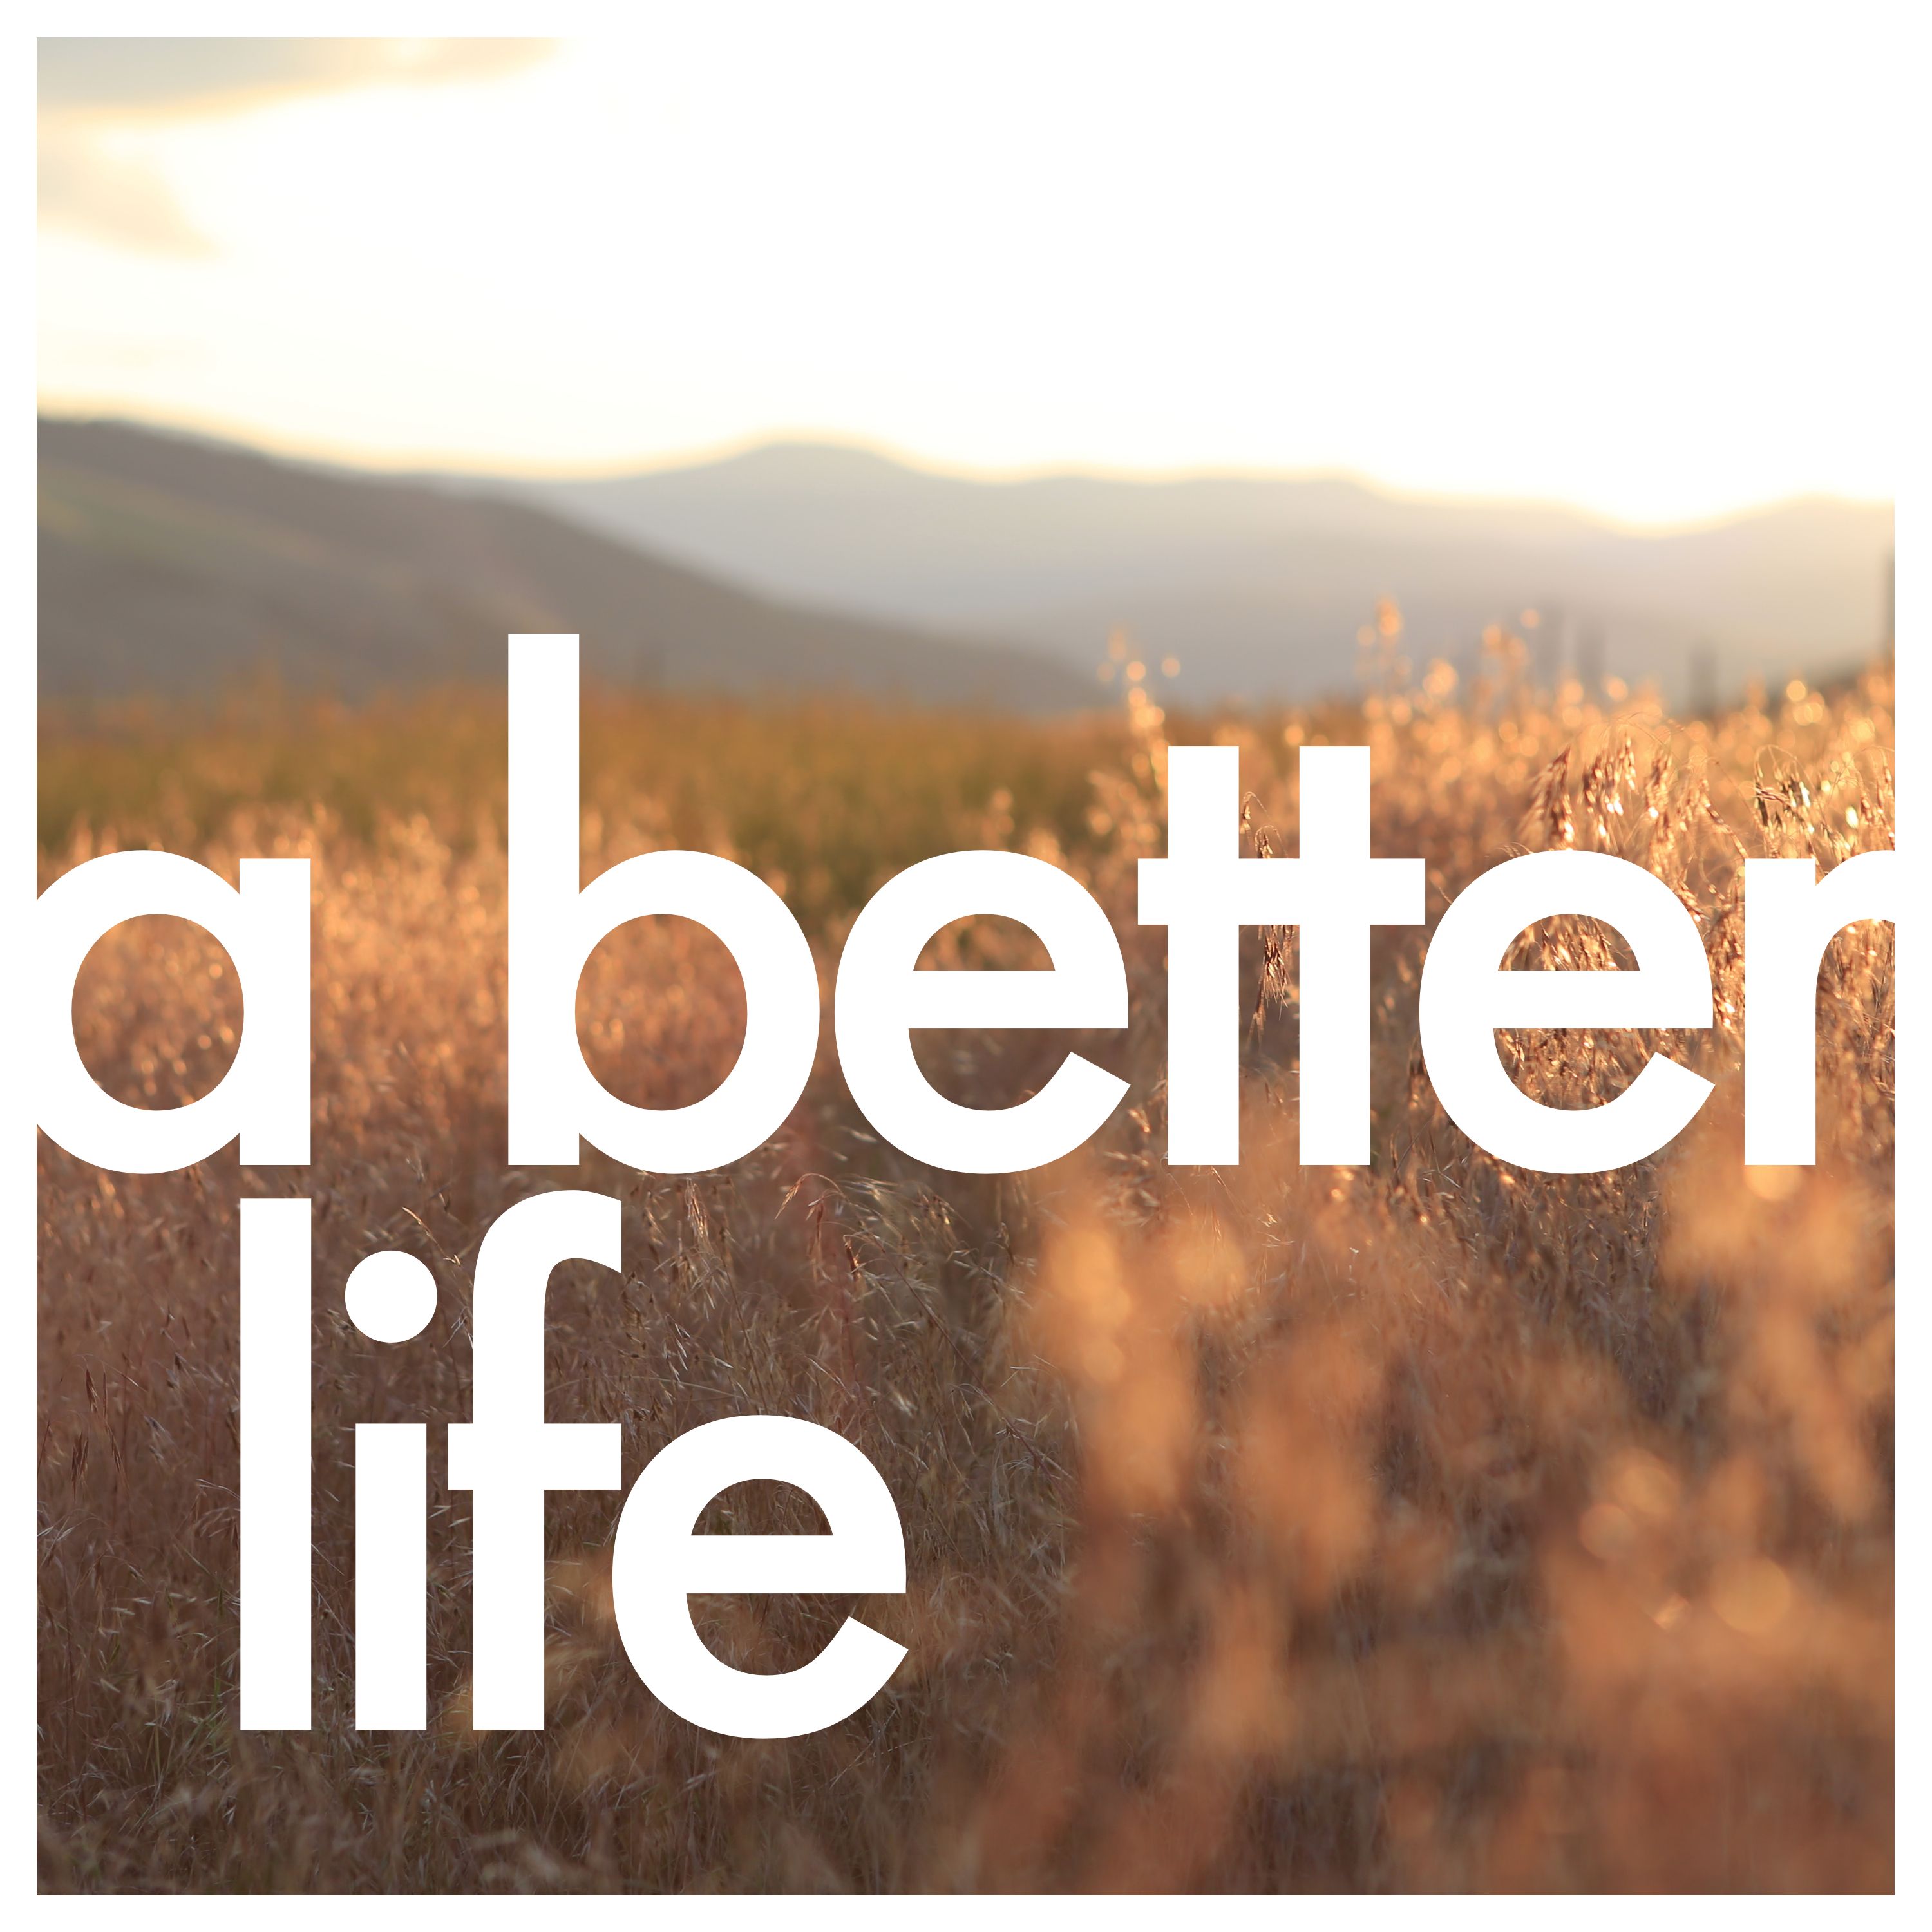 Stream A Better Life | Listen to podcast episodes online for free on  SoundCloud